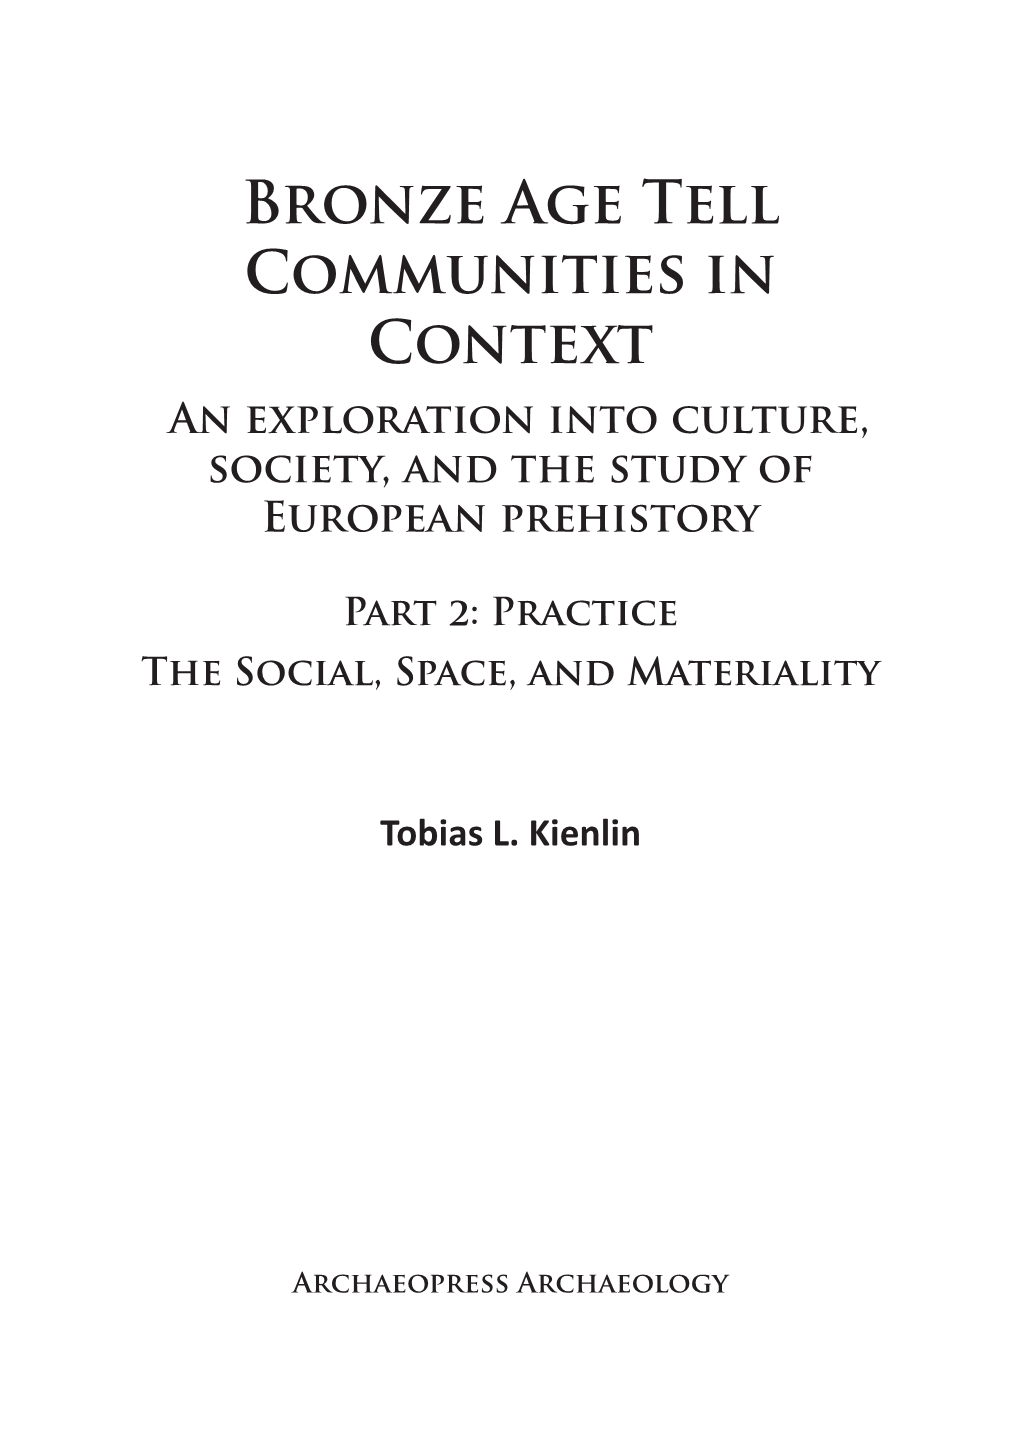 Bronze Age Tell Communities in Context an Exploration Into Culture, Society, and the Study of European Prehistory